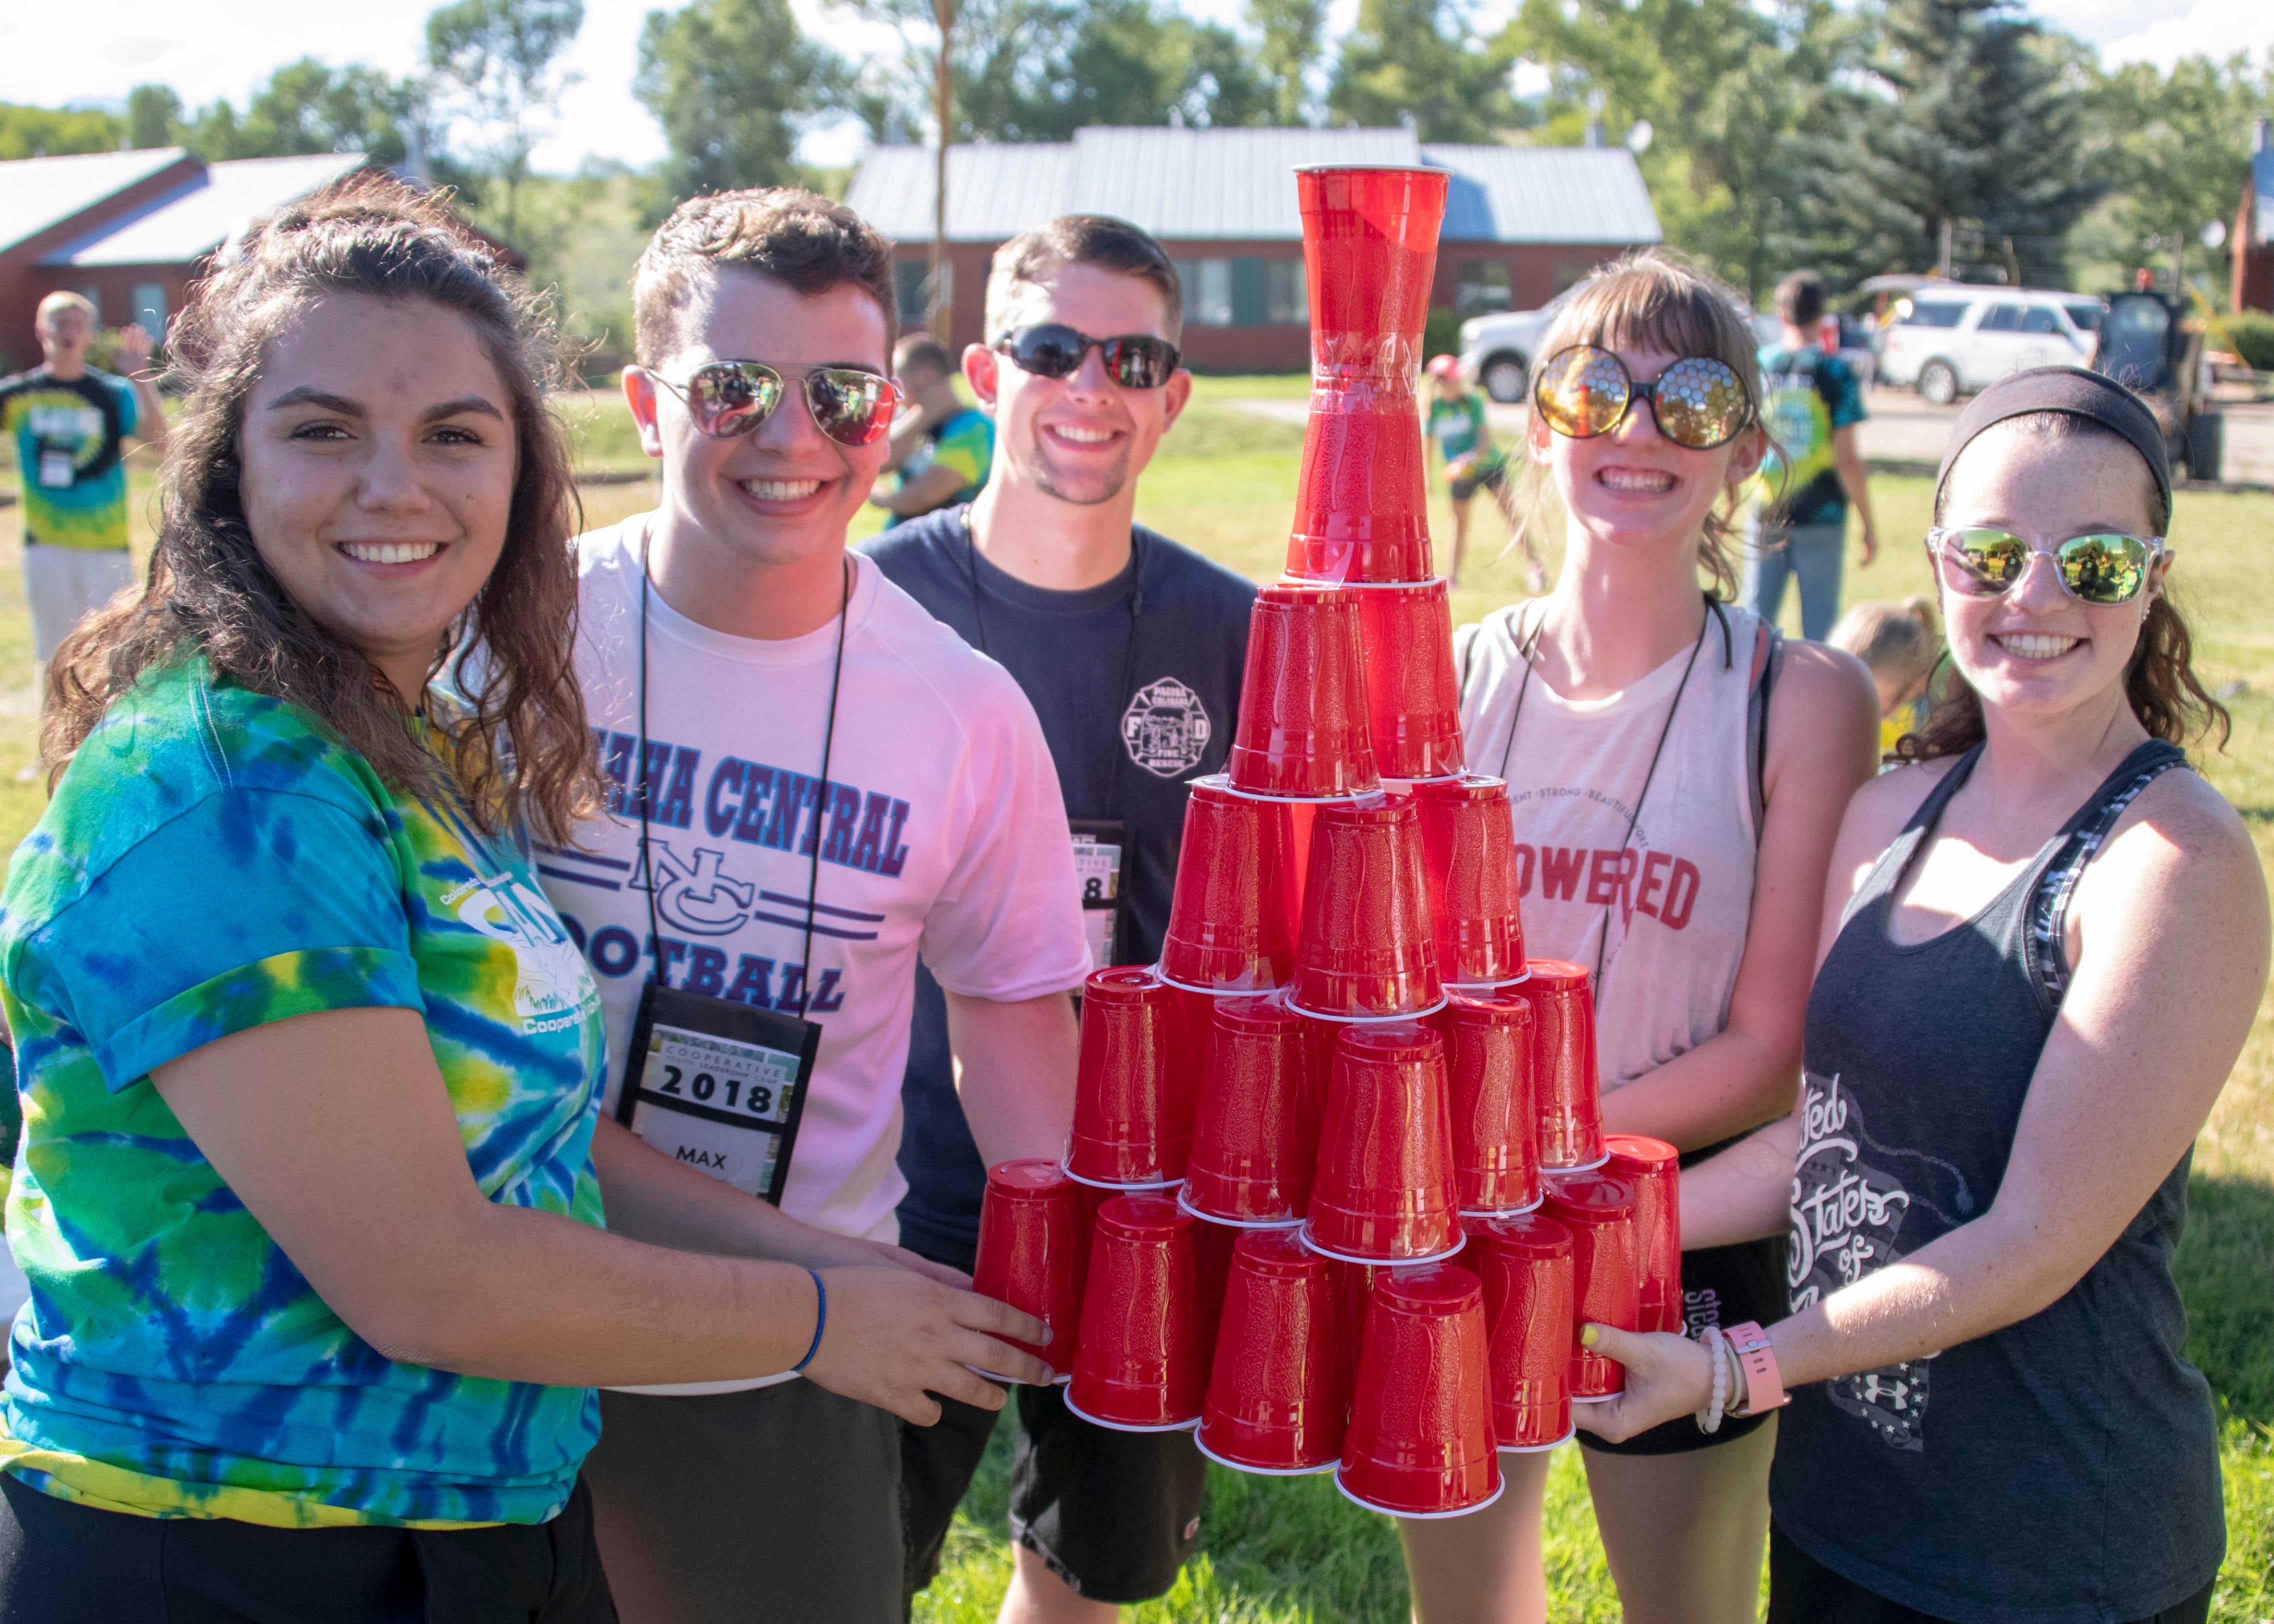 Campers challenged each team to create the tallest cup tower